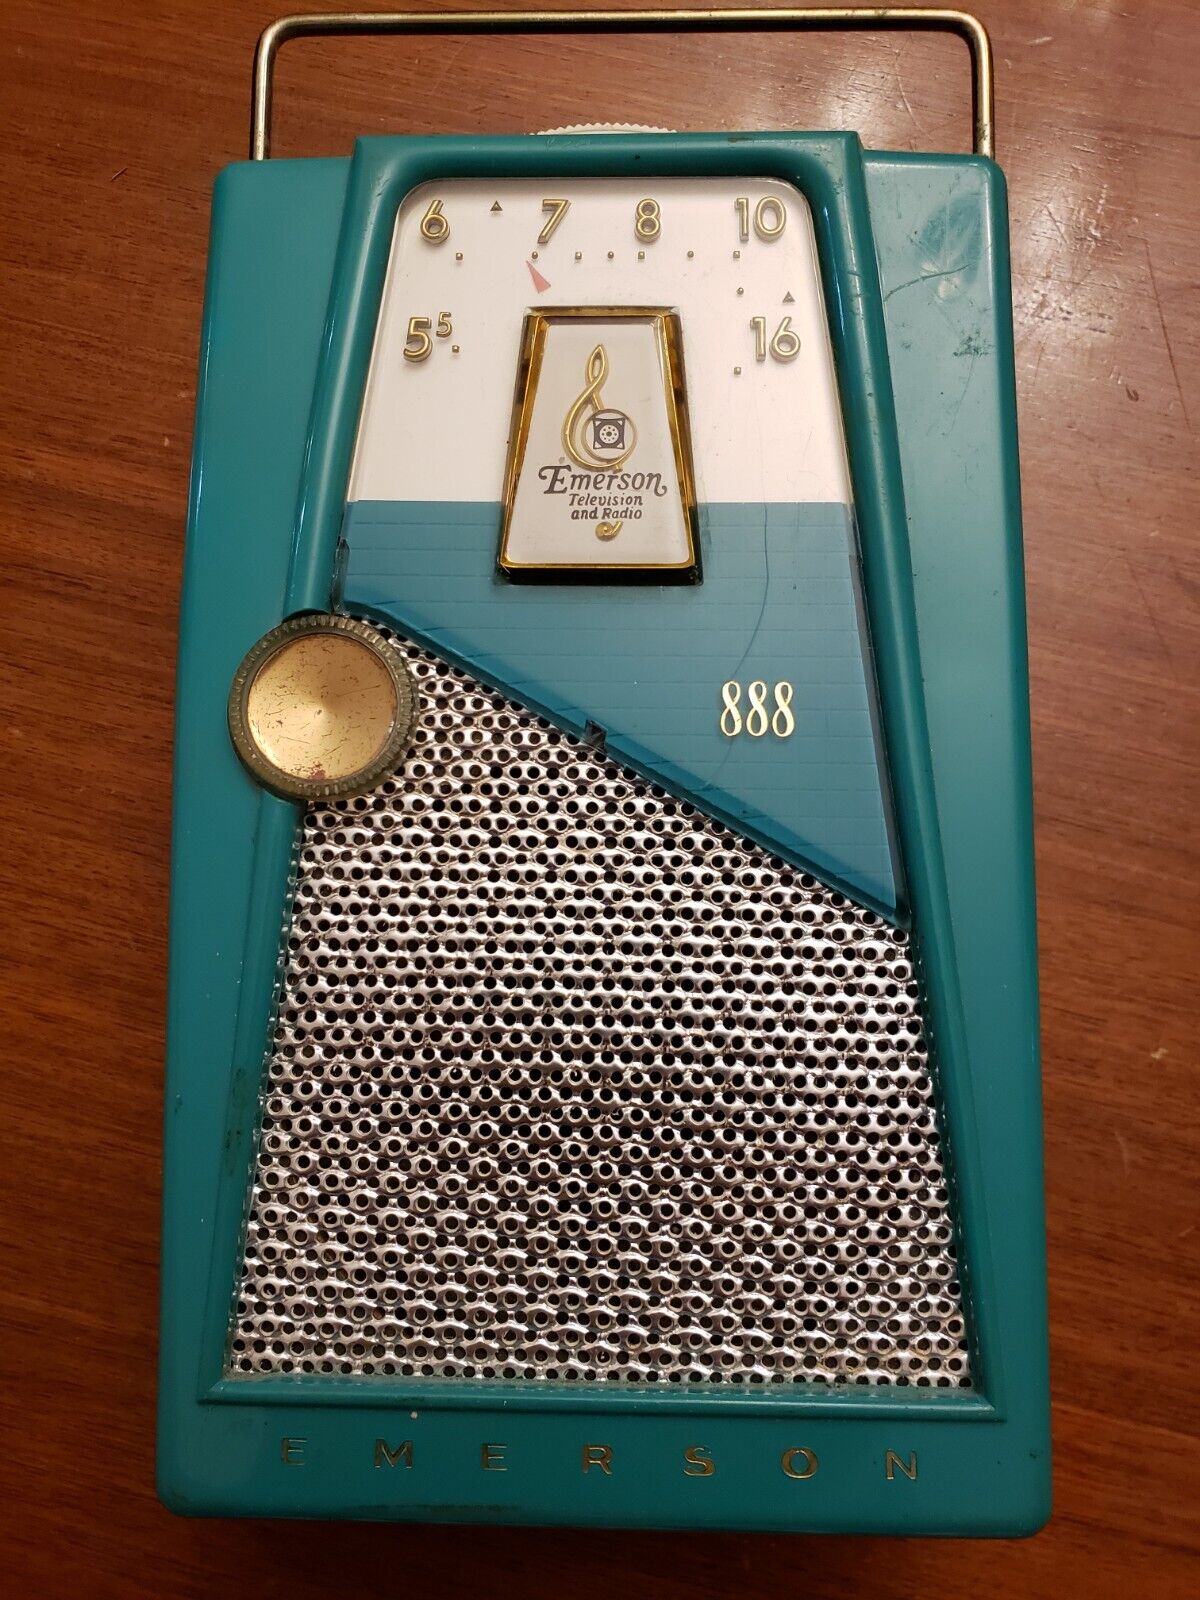 Emerson 888 Explorer Transistor Radio, Turquoise, Does Not Work